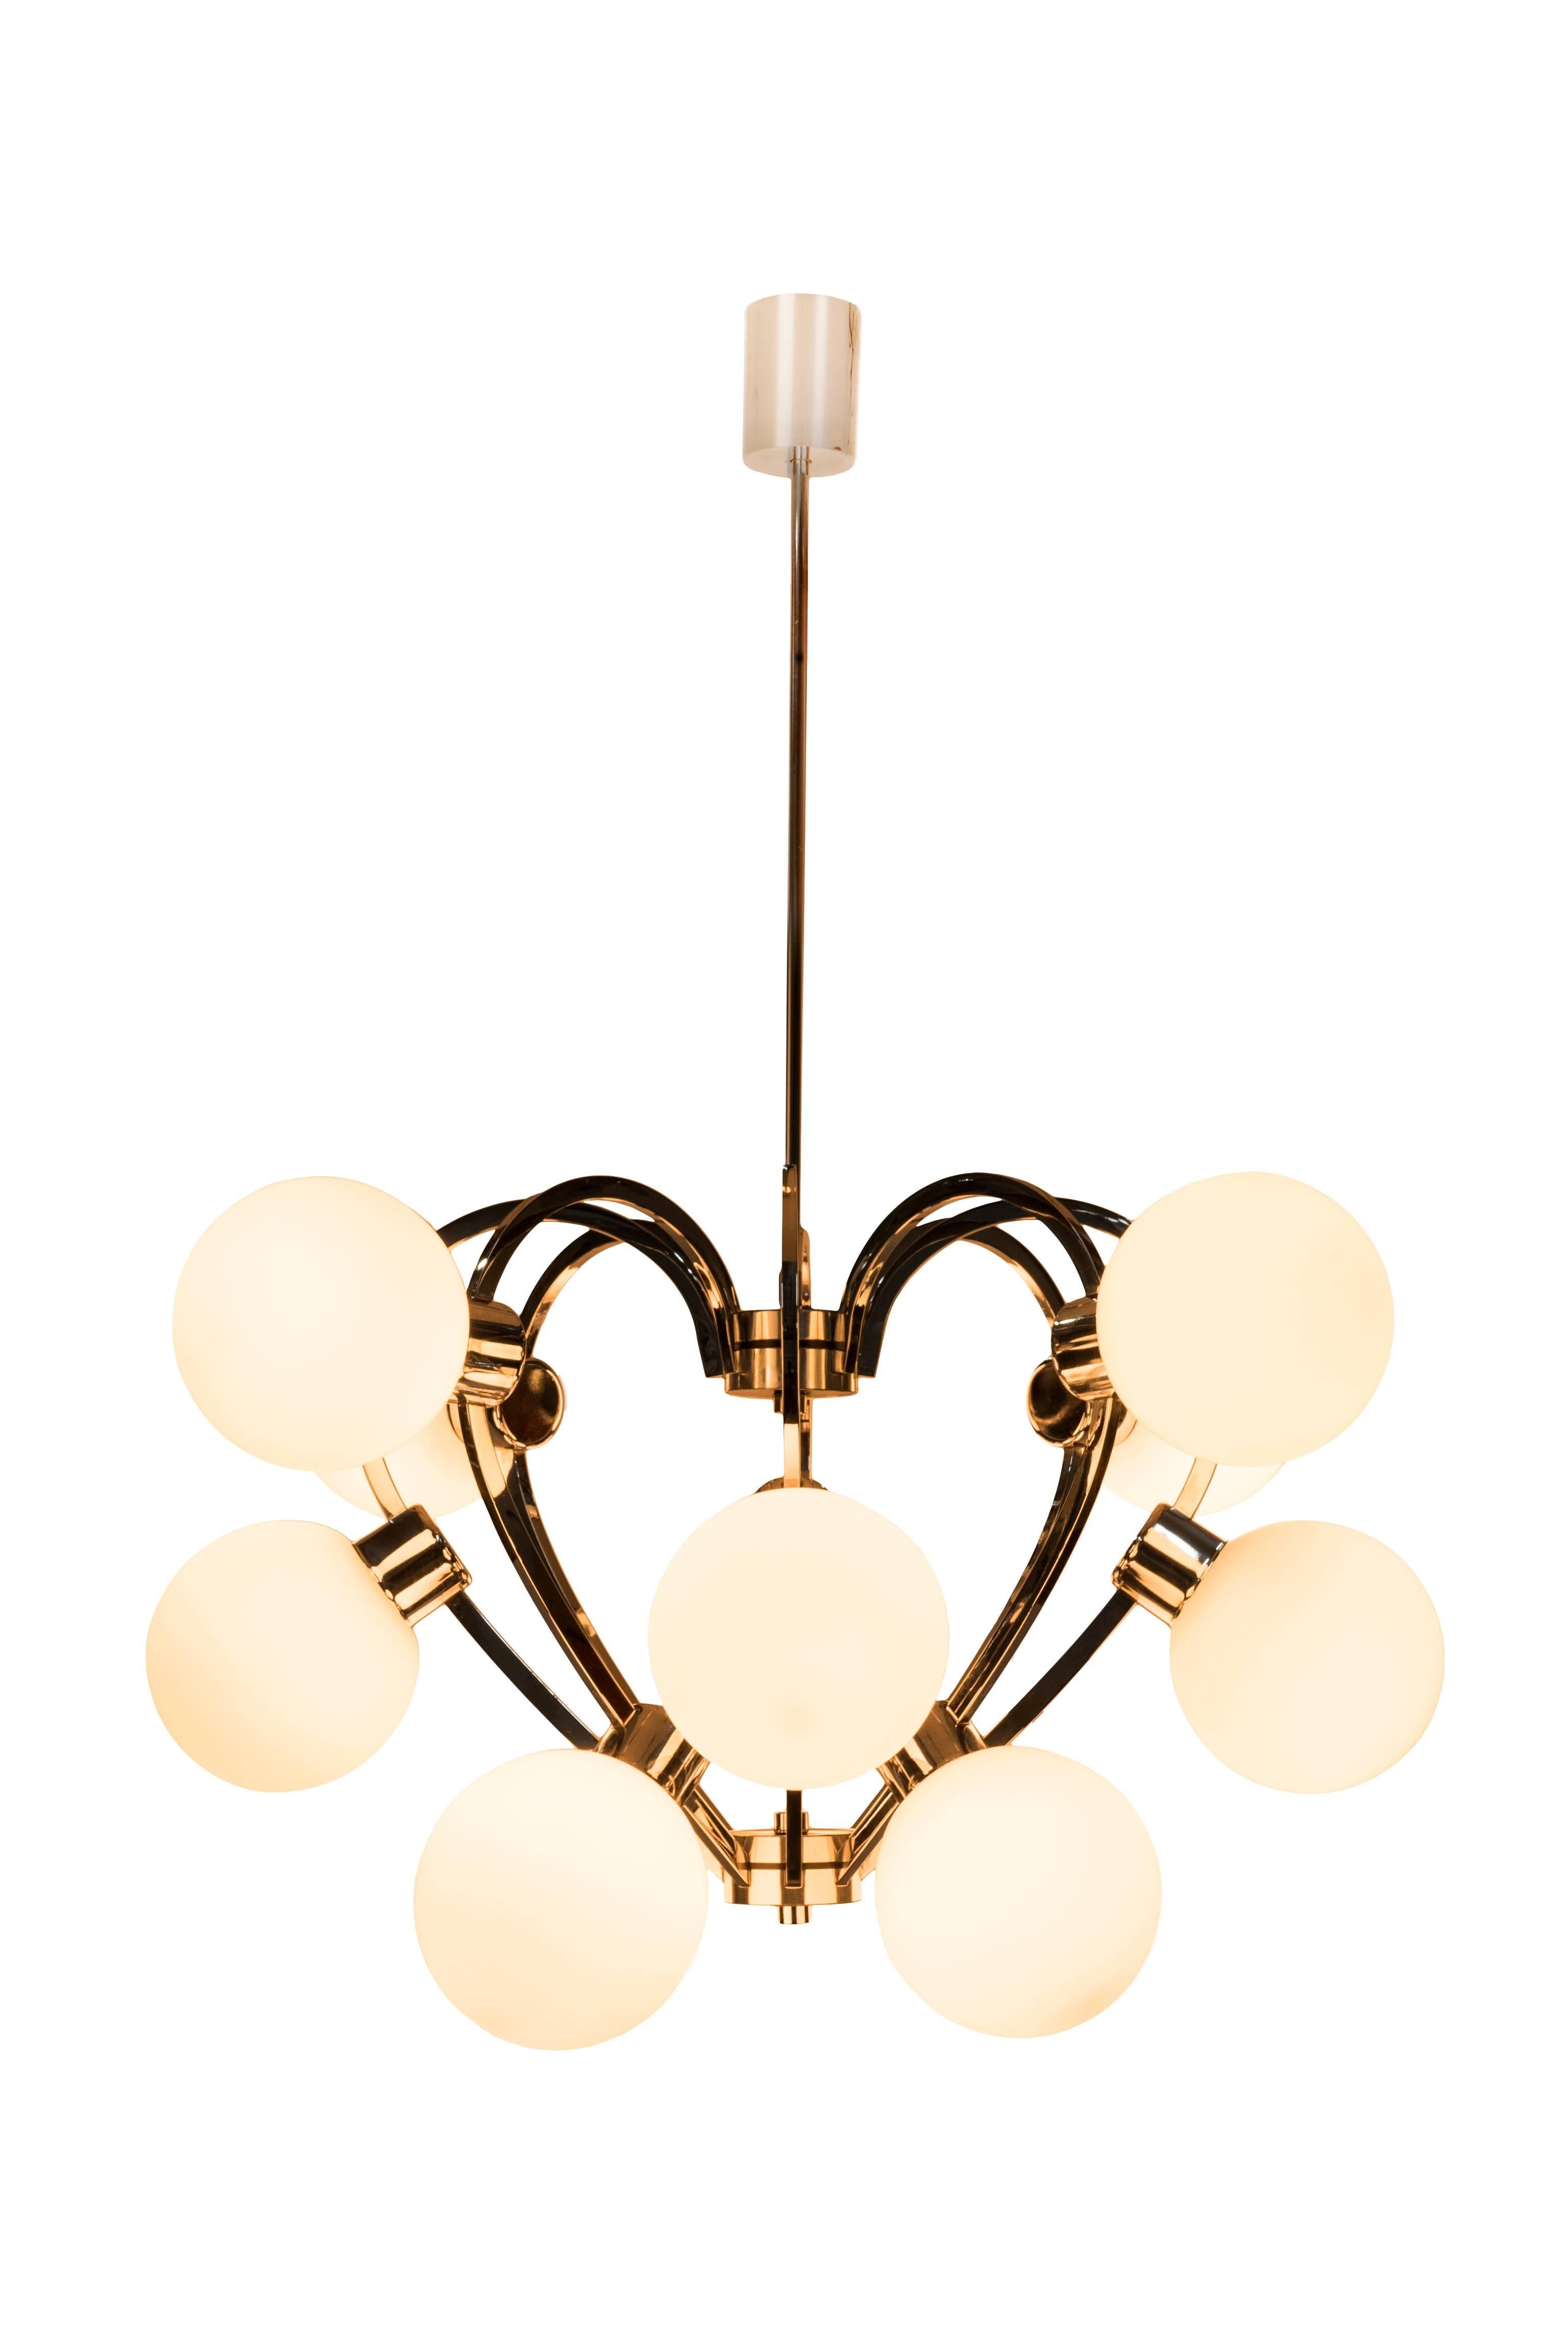 This superb 1970s Mid-Century Modernist Sputnik chandelier features an heart shape form design on a chrome frame with (12) opal glass globes.

Made in Germany, circa 1970

Measures: 16 1/2